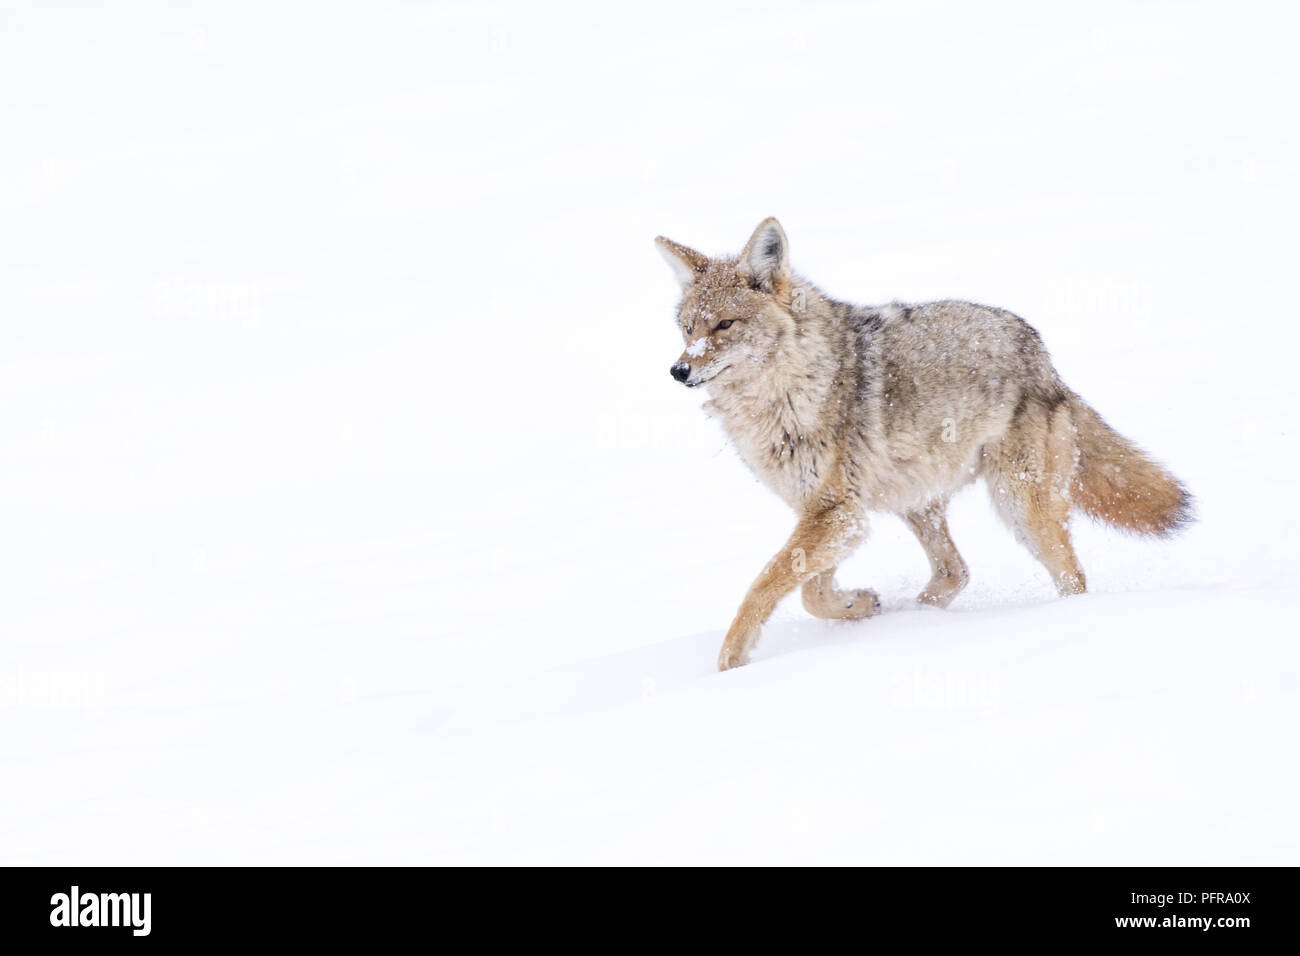 Coyote (Canis latrans) traveling through the snowy landscape of Yellowstone National Park, Wyoming, USA. Stock Photo